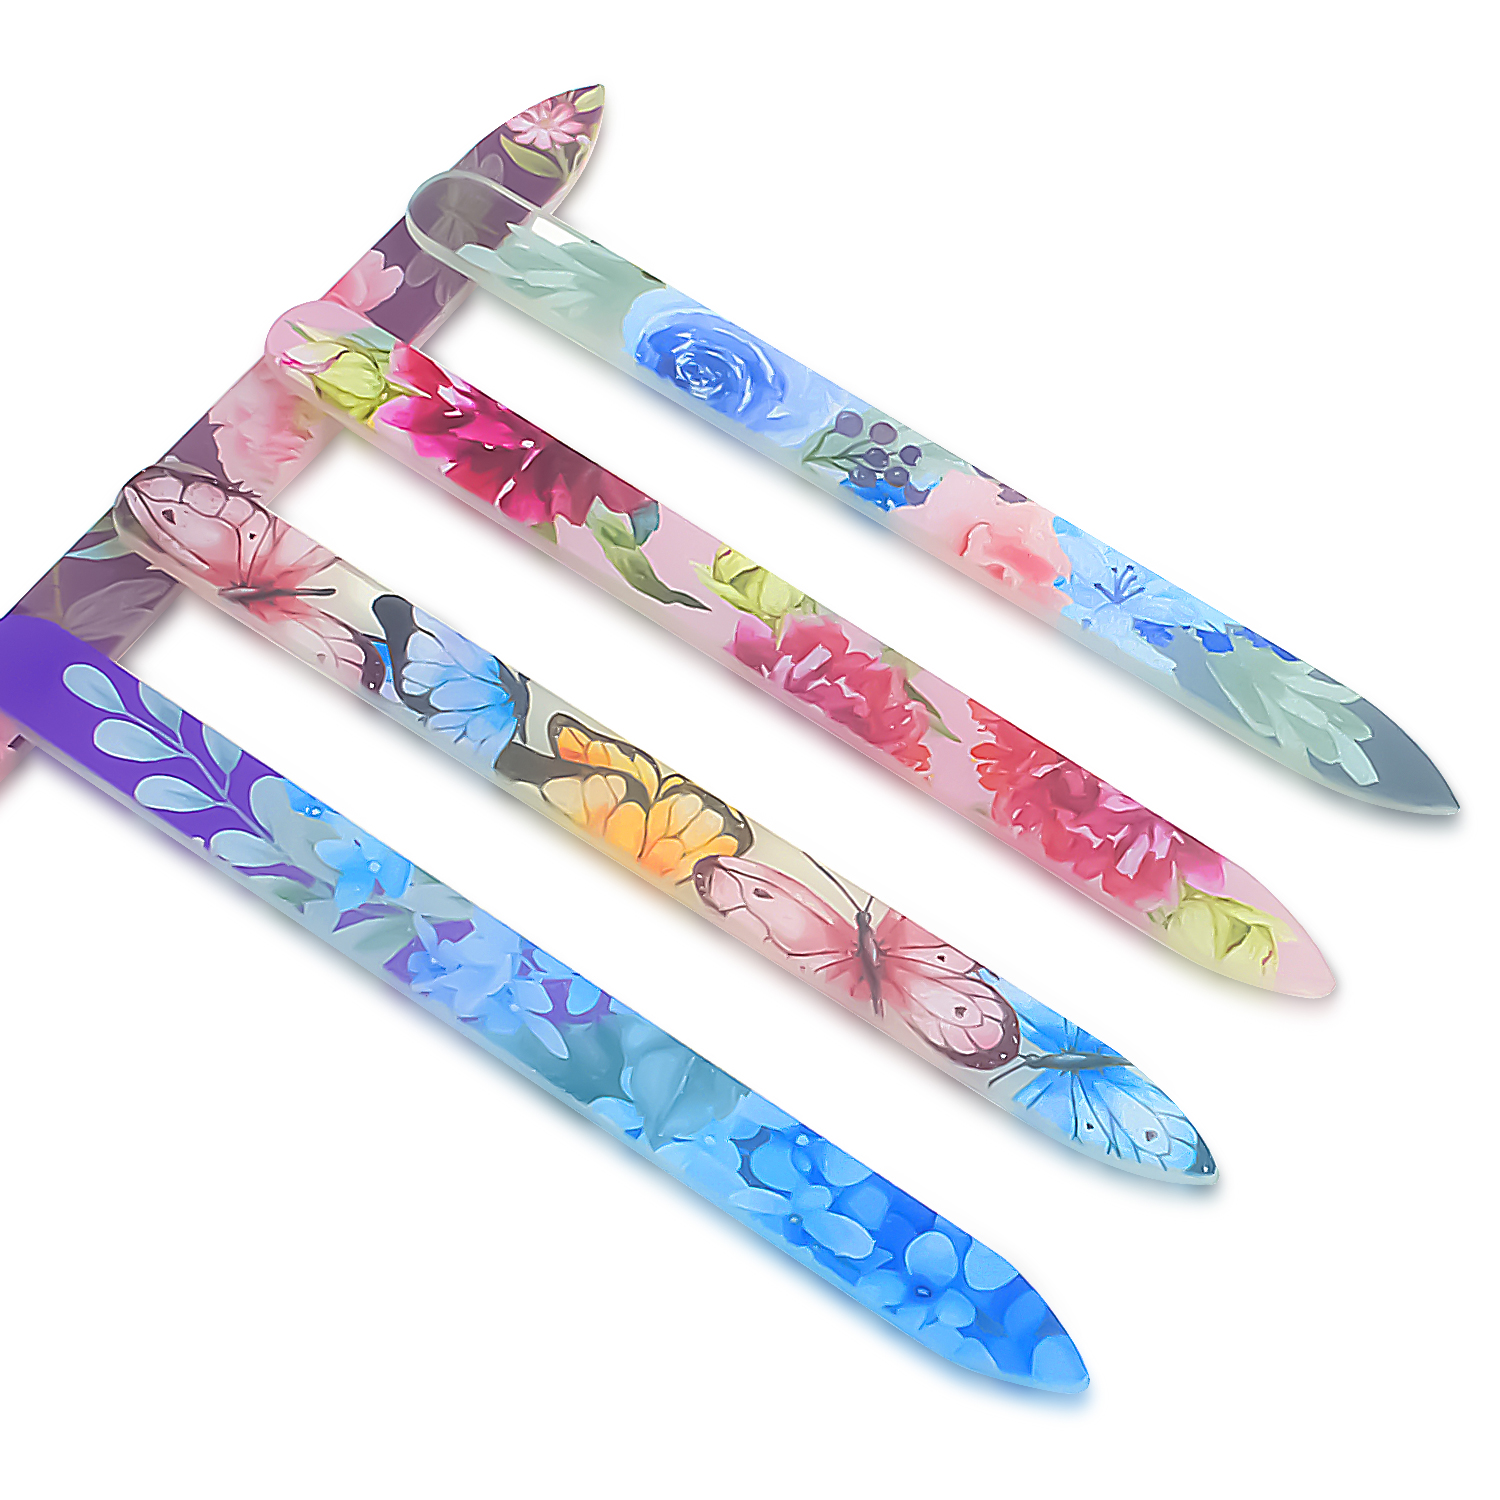 Premium Crystal Glass Nail Files With Colorful Flower Patterns